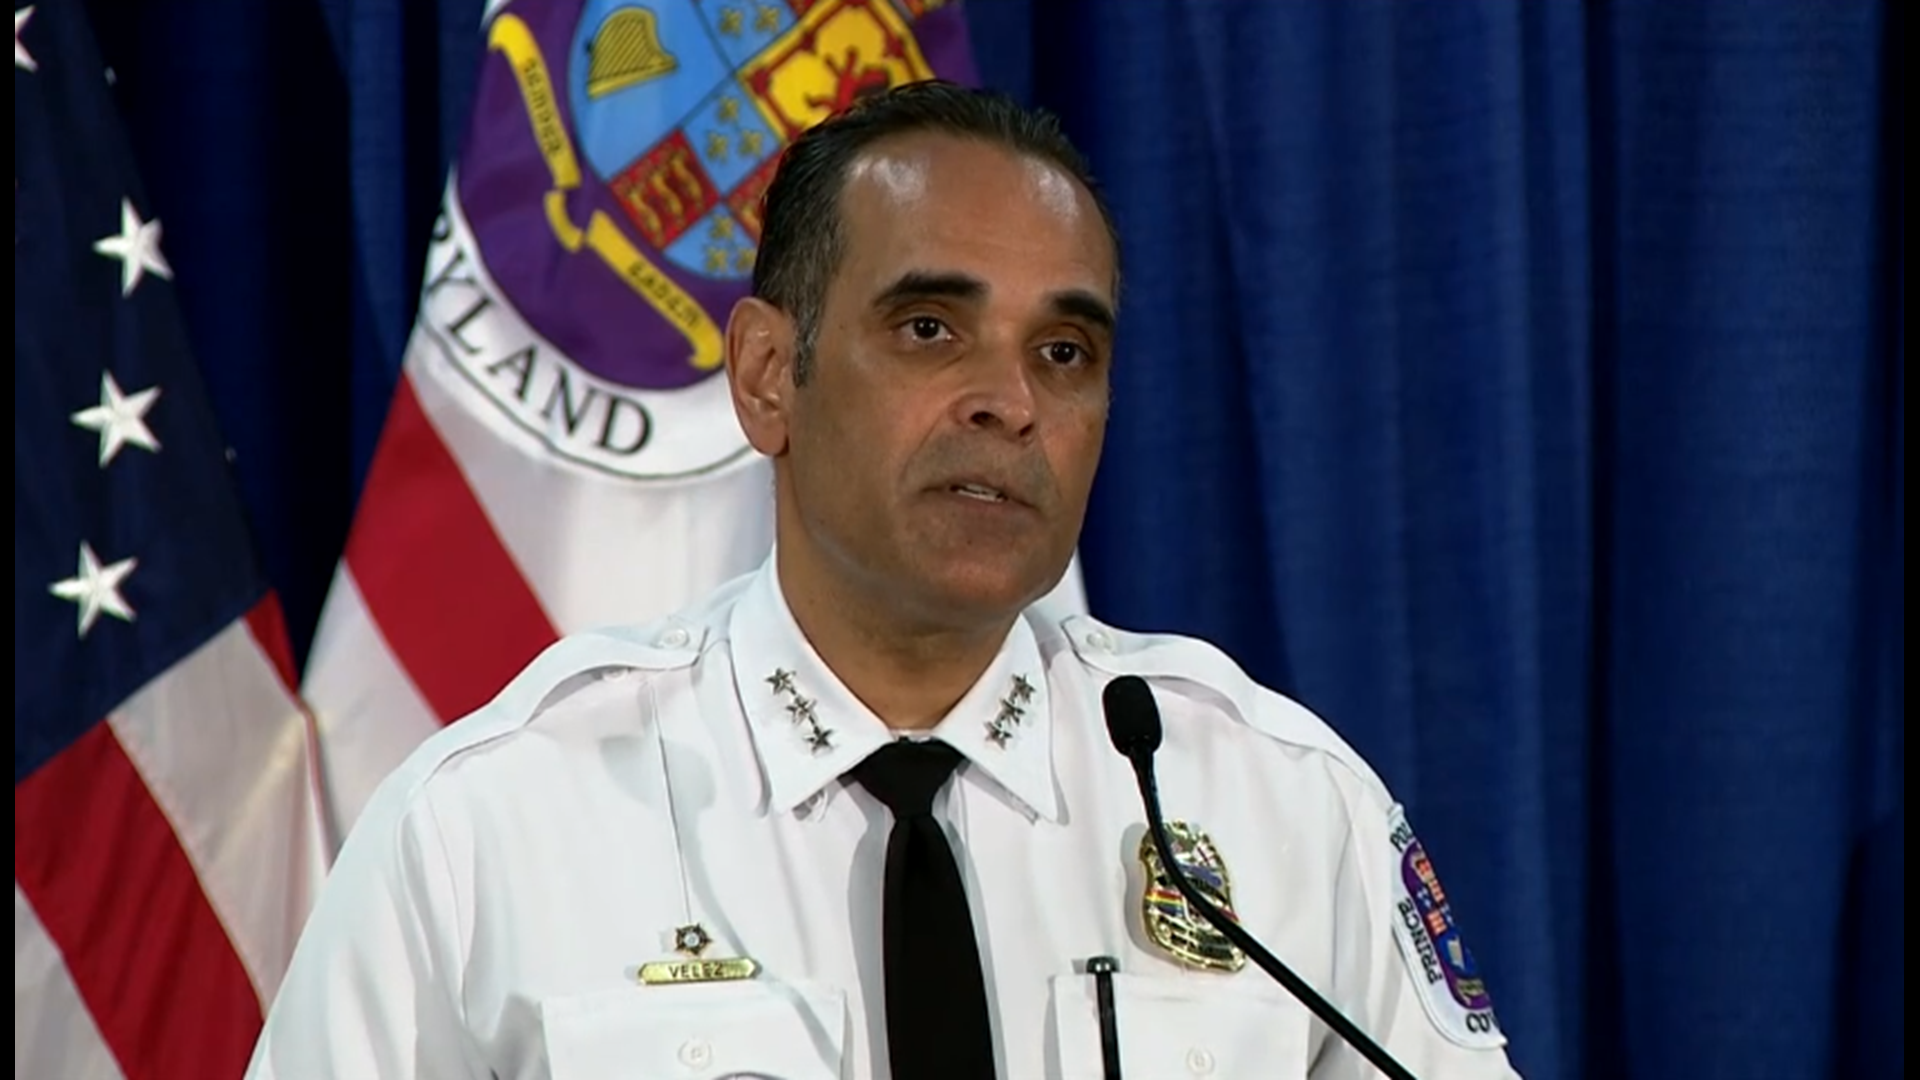 Assistant Chief Hector Velez will serve as interim chief of the Prince George's County Police Department following the resignation of former chief Hank Stawinski.